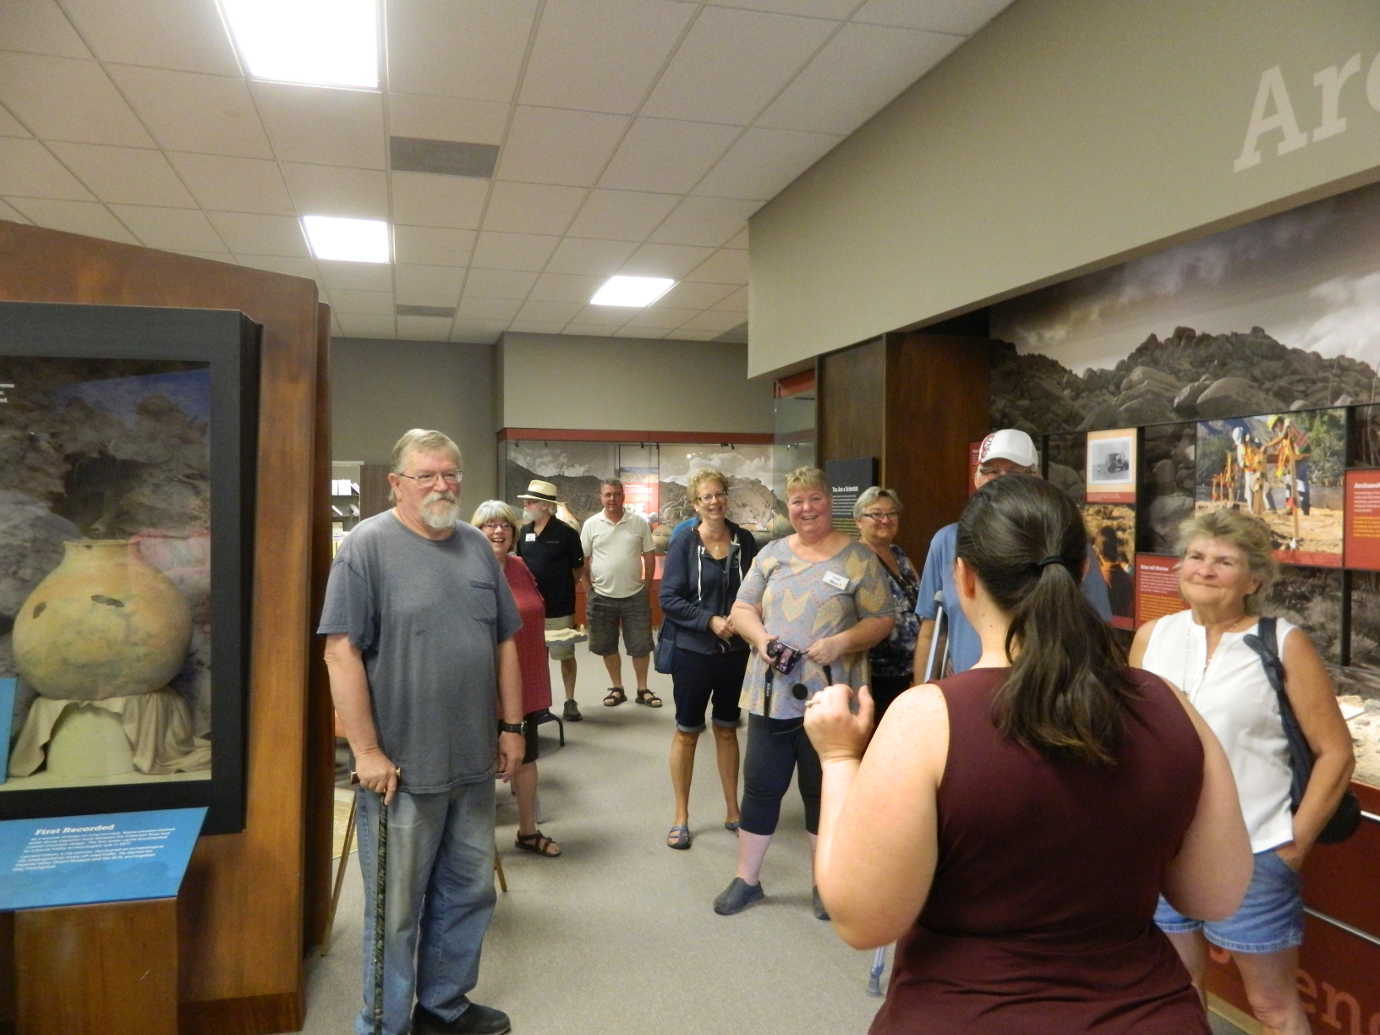 A tour group explores the Imperial Valley Desert Museum's main exhibition. Image courtesy of the Imperial Valley Desert Museum.